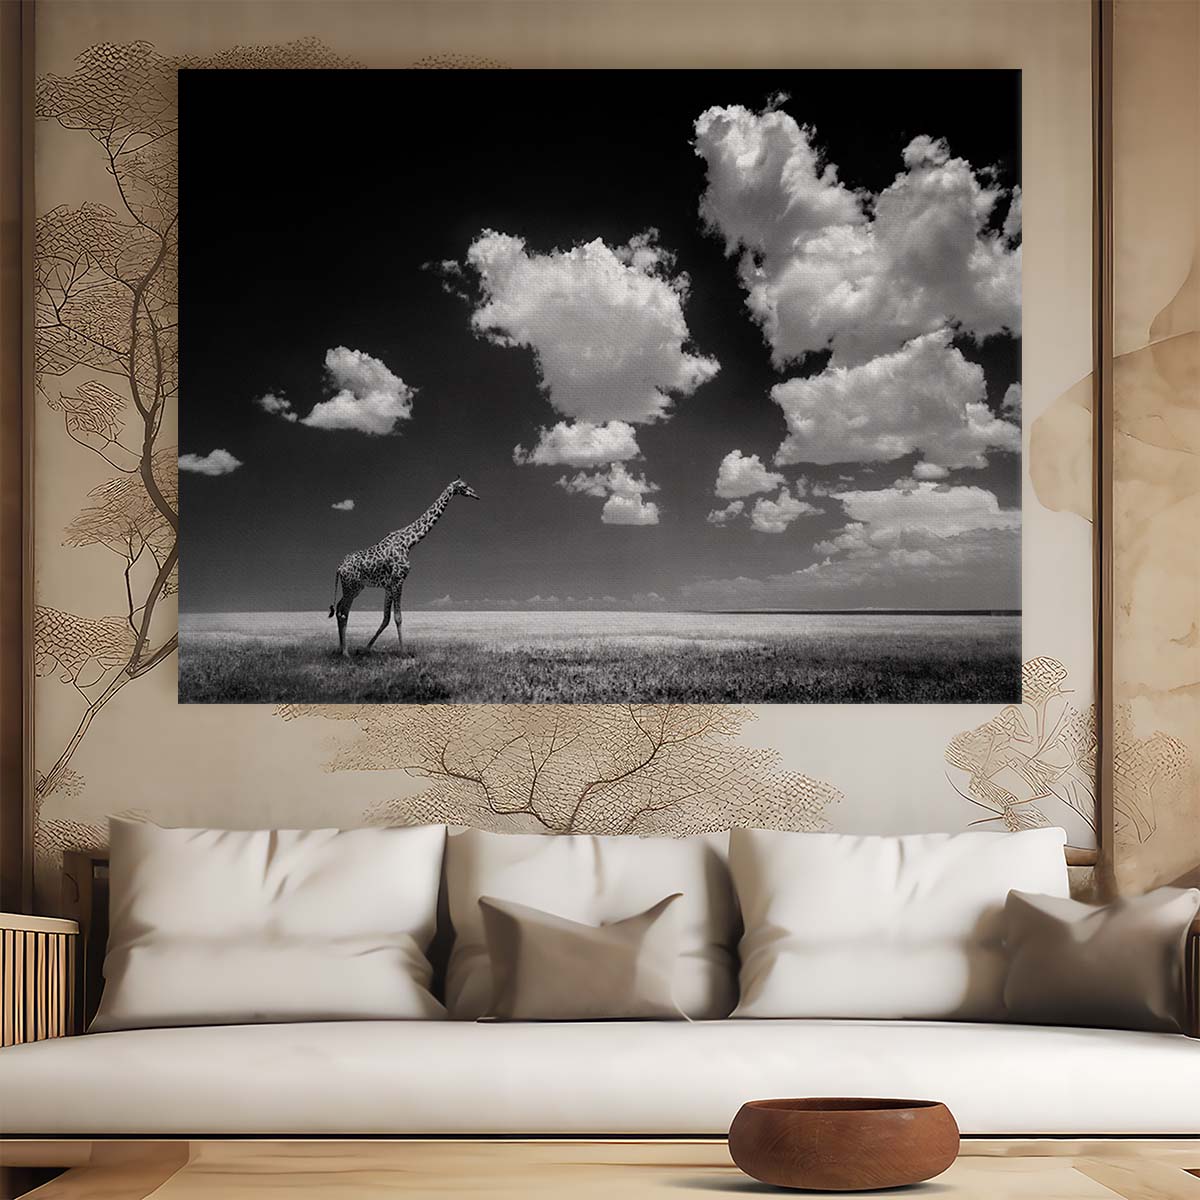 Monochrome Giraffe in Cloudy African Sky Wall Art by Luxuriance Designs. Made in USA.